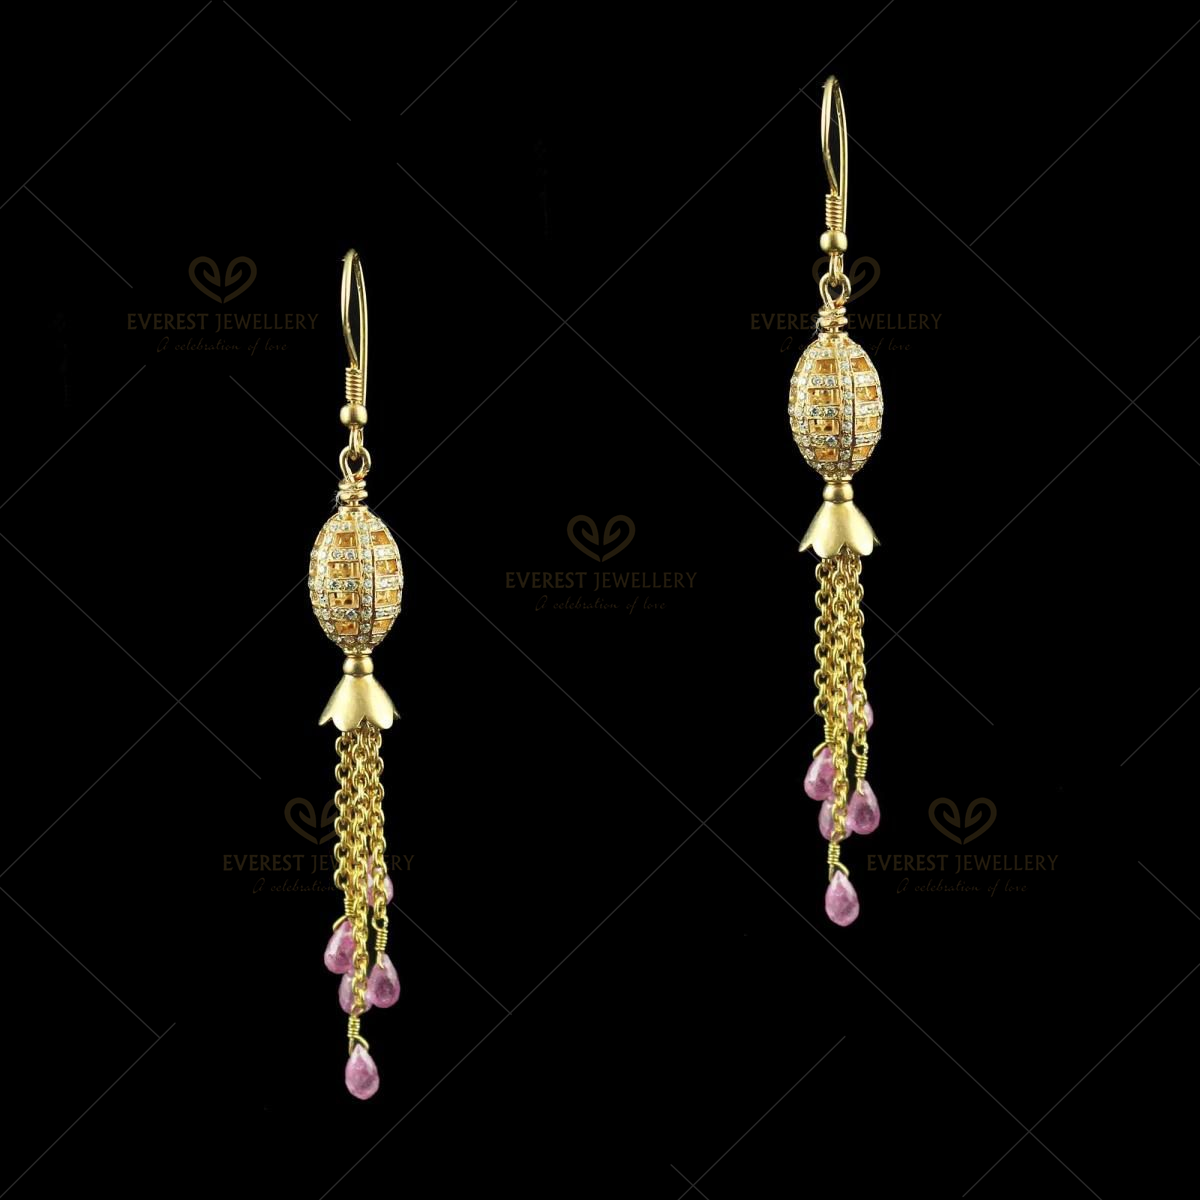 rose gold hanging earring studded with zircon stone and ruby